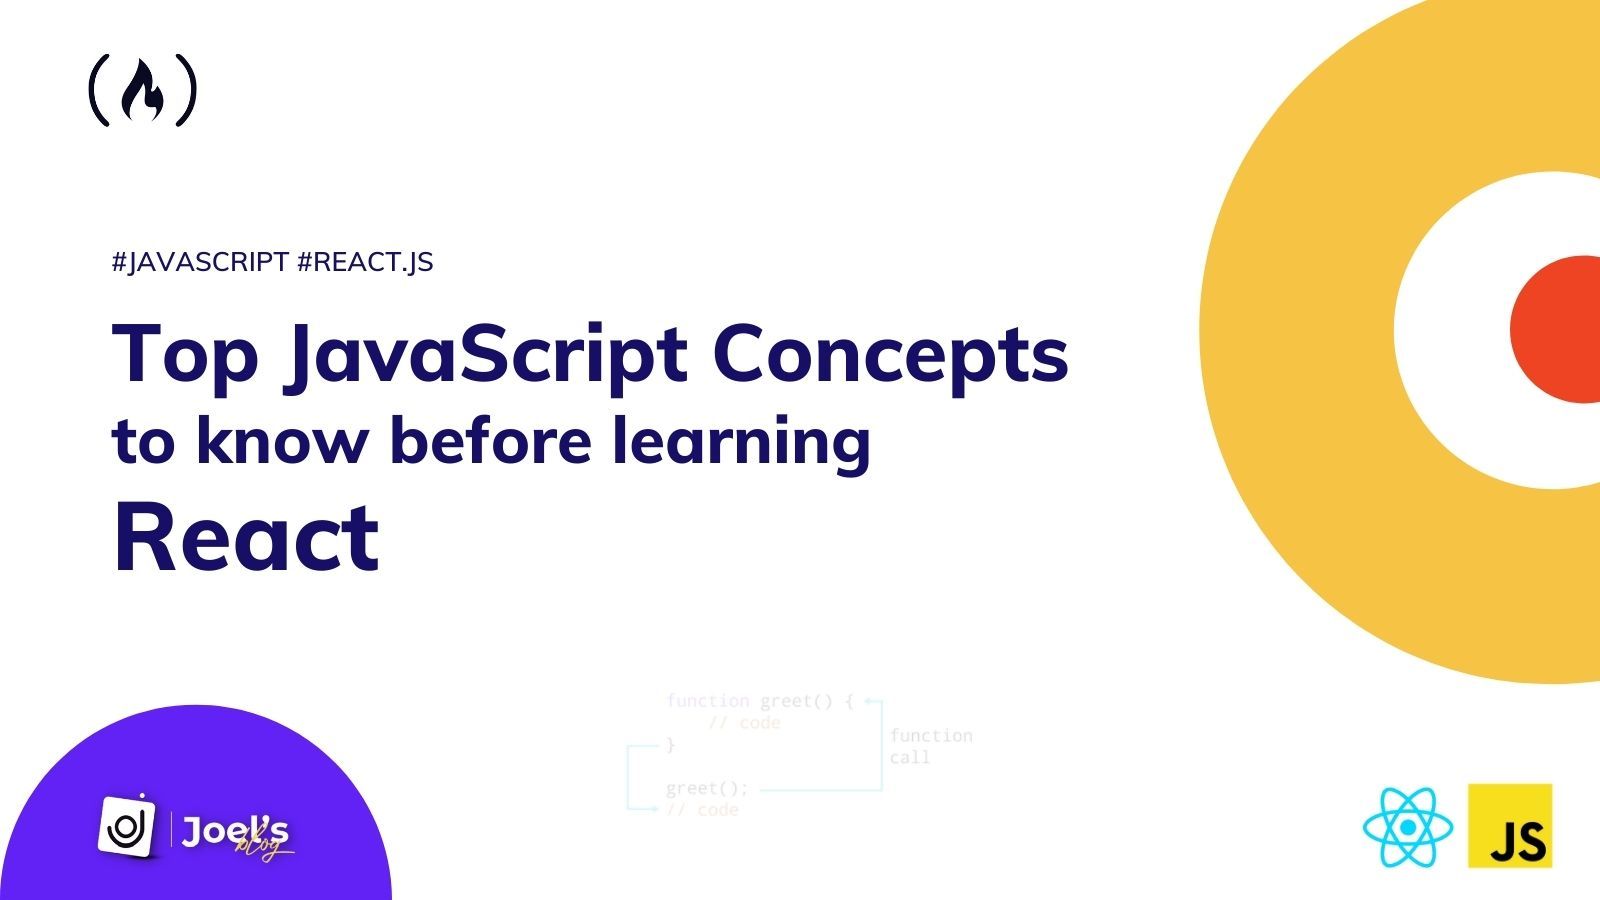 Top JavaScript Concepts to Know Before Learning React